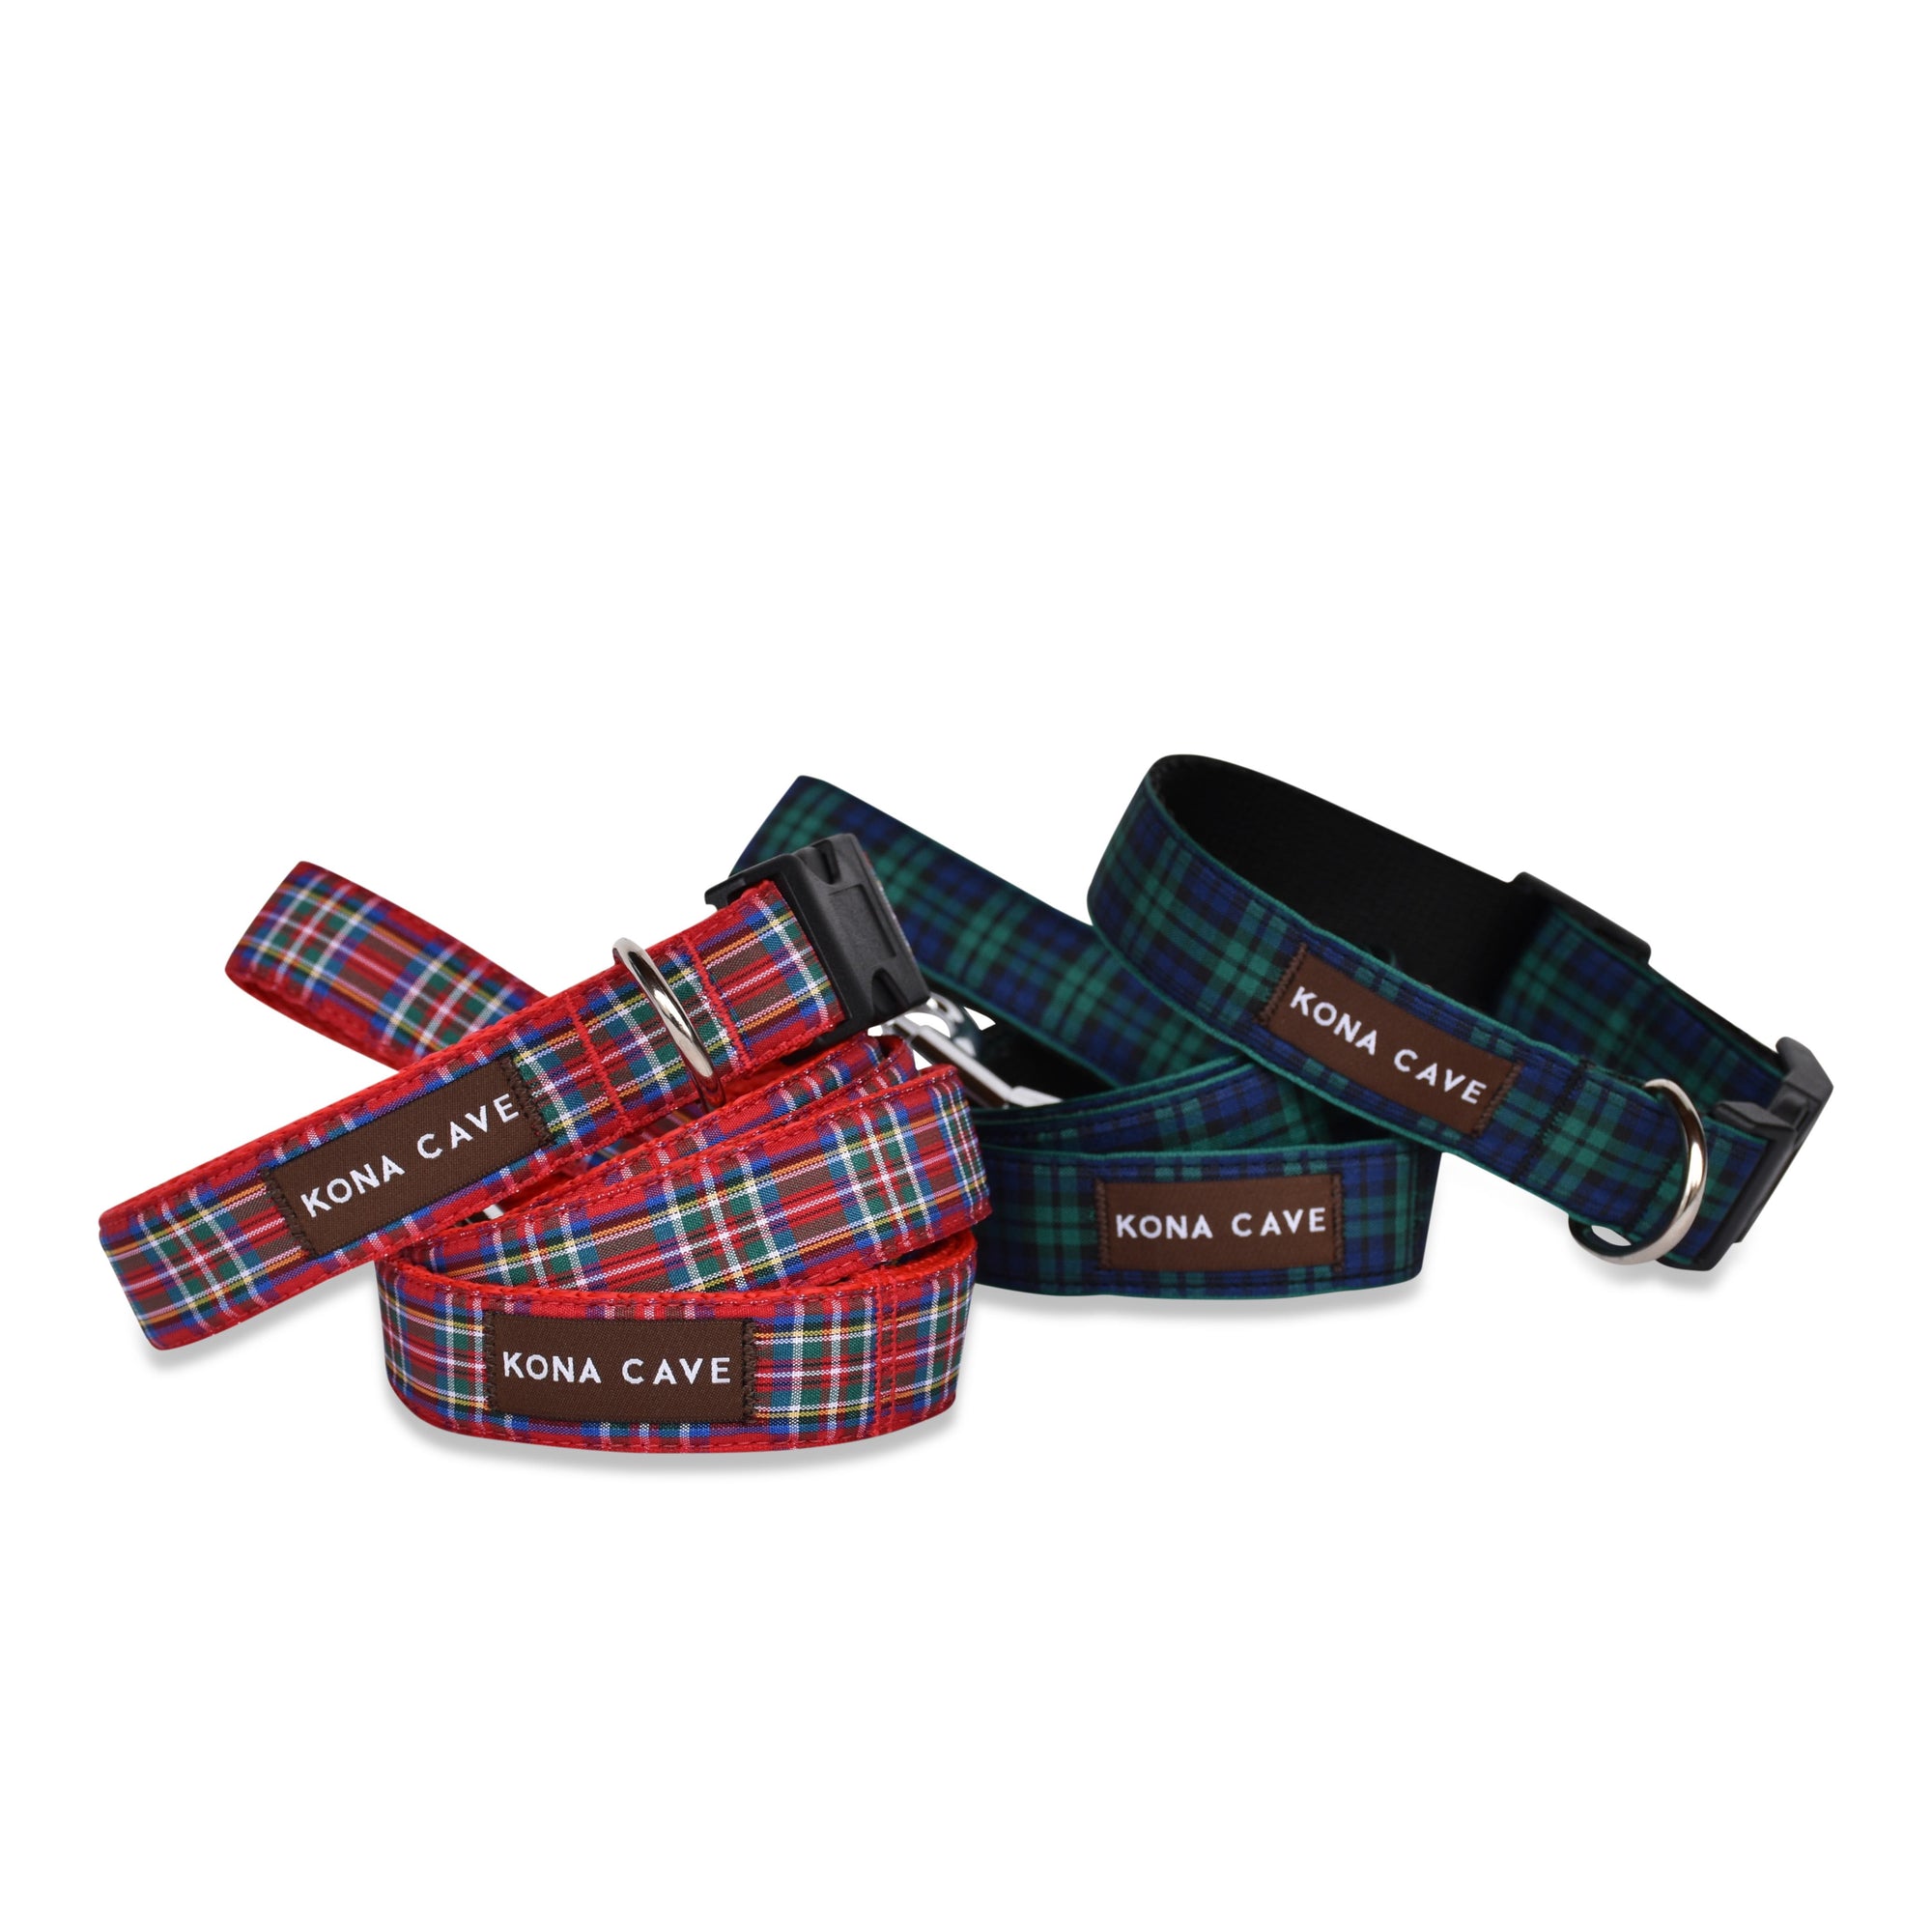 KONA CAVE® Adjustable dog leash. Authentic Blackwatch and Royal Stewart tartan ribbon on nylon leash.  Extra Clip and D-rings to shorten leash or attach poop bags, etc. Light weight and comfortable.